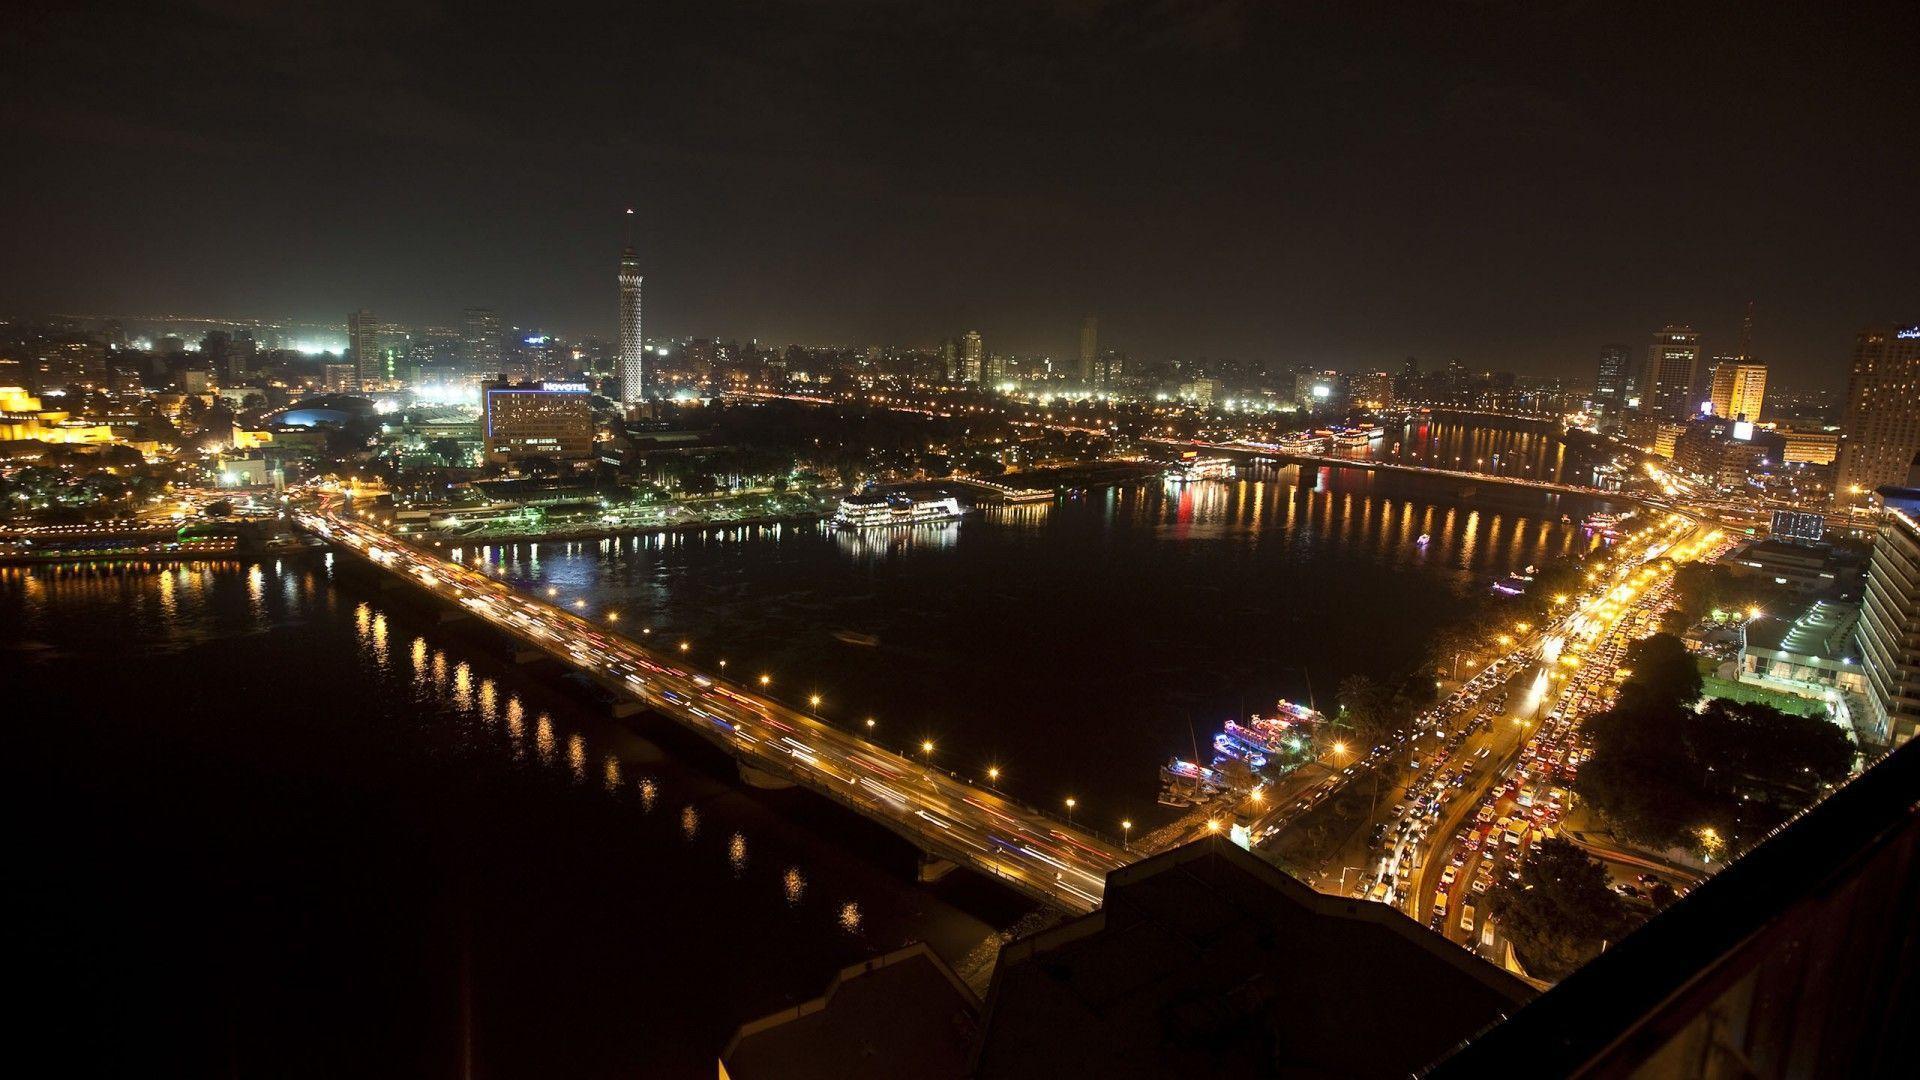 Night view in Cairo wallpaper and image, picture